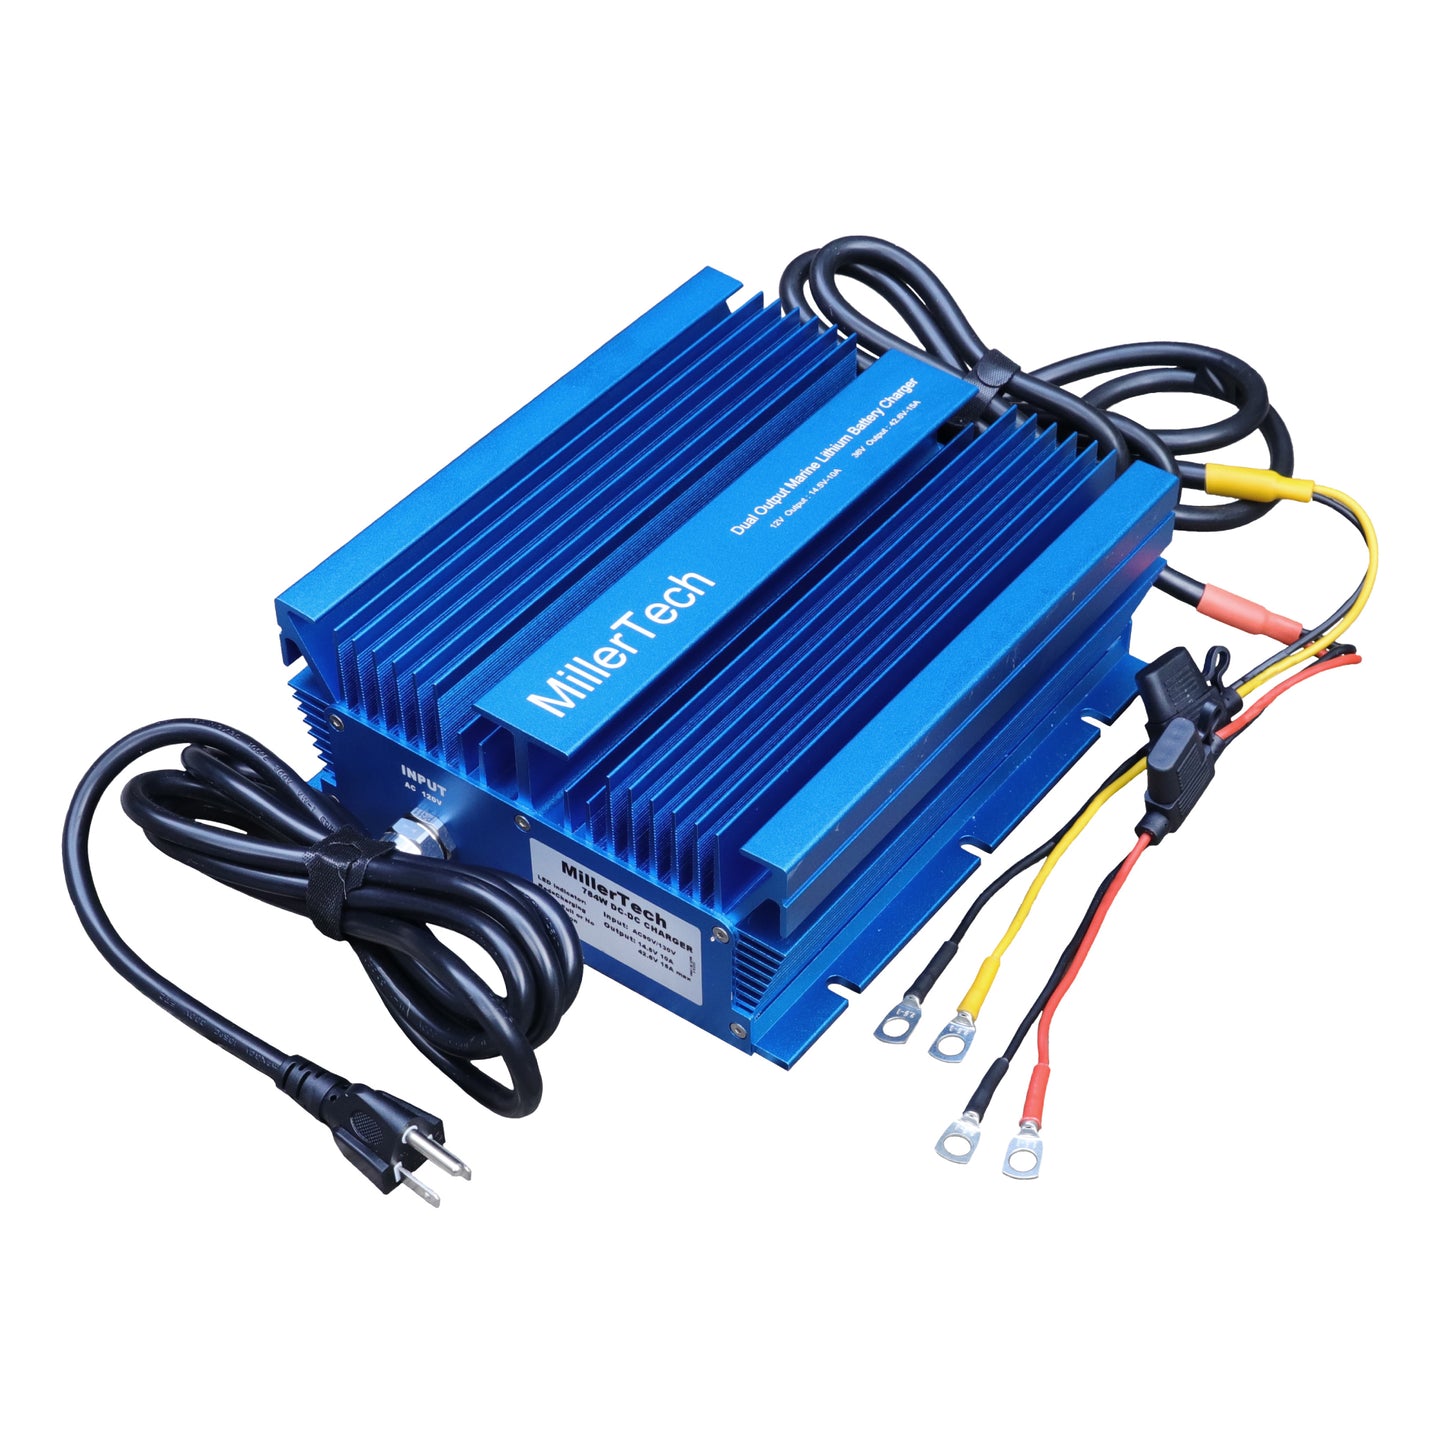 MillerTech Dual Output 12V/36V 784W MARINE Lithium Iron Phosphate Battery Charger (1210-3615)